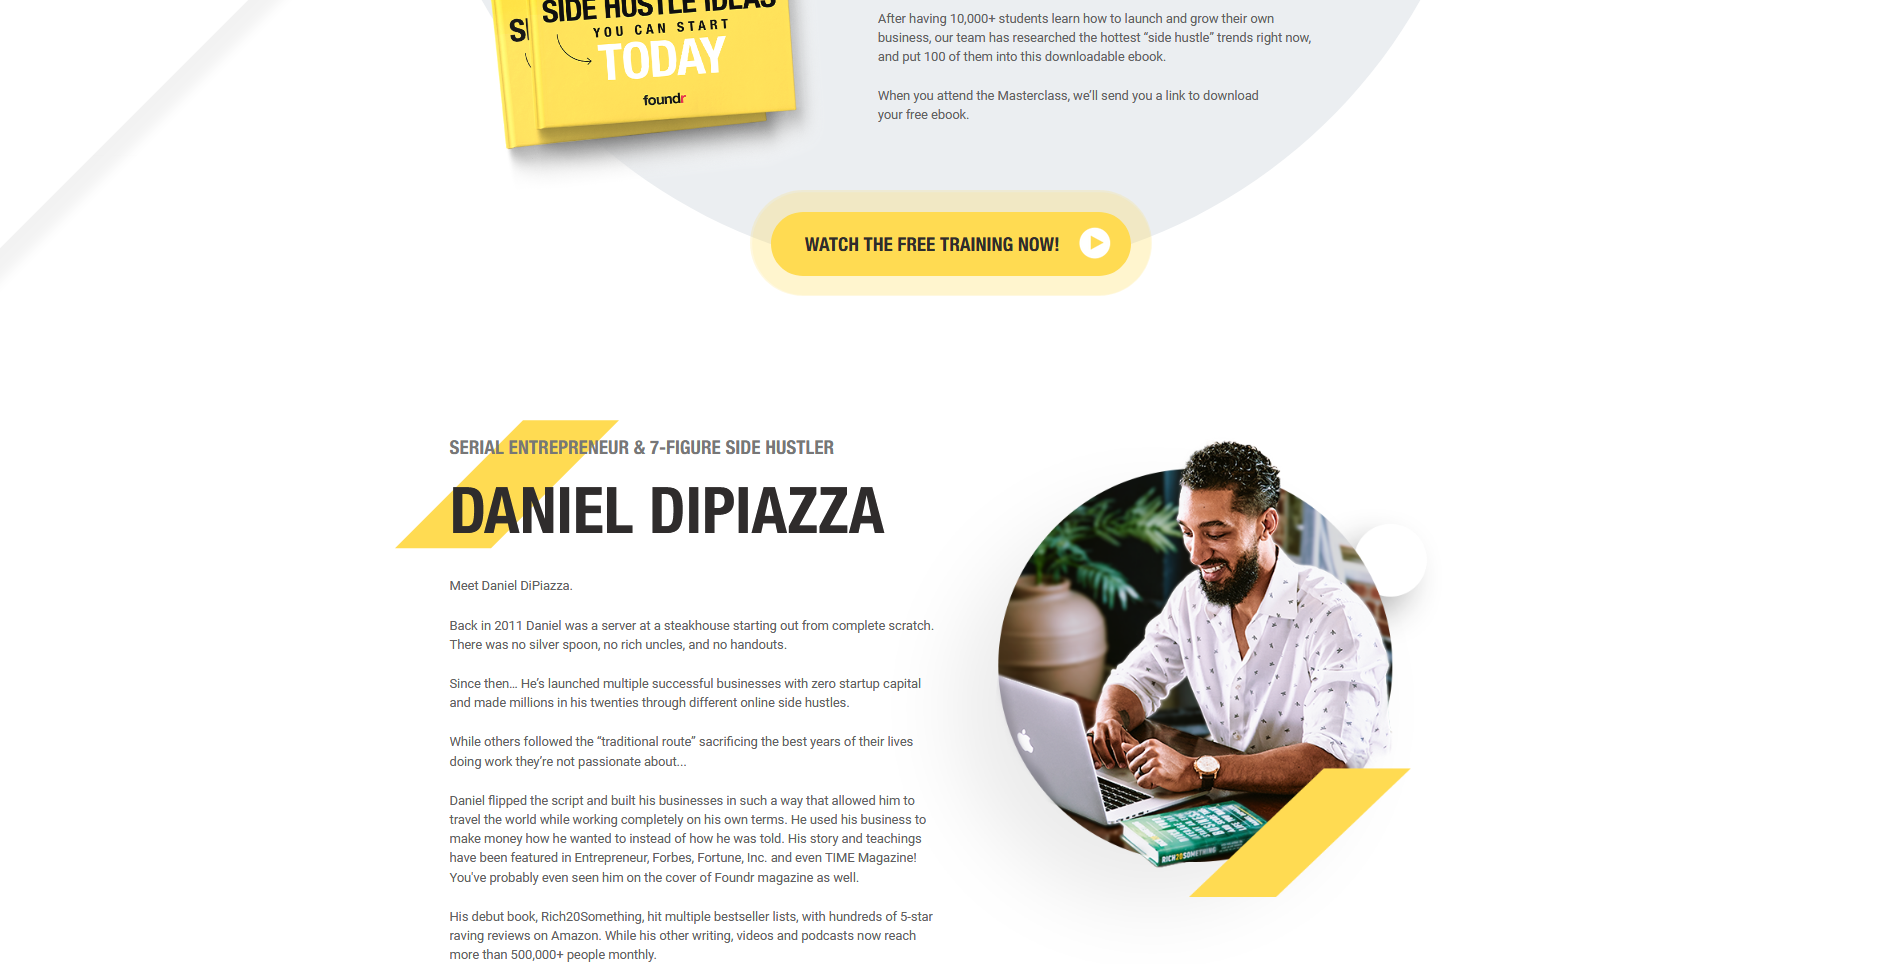 How to Start Online Side Hustle with Daniel DiPiazza - Foundr 